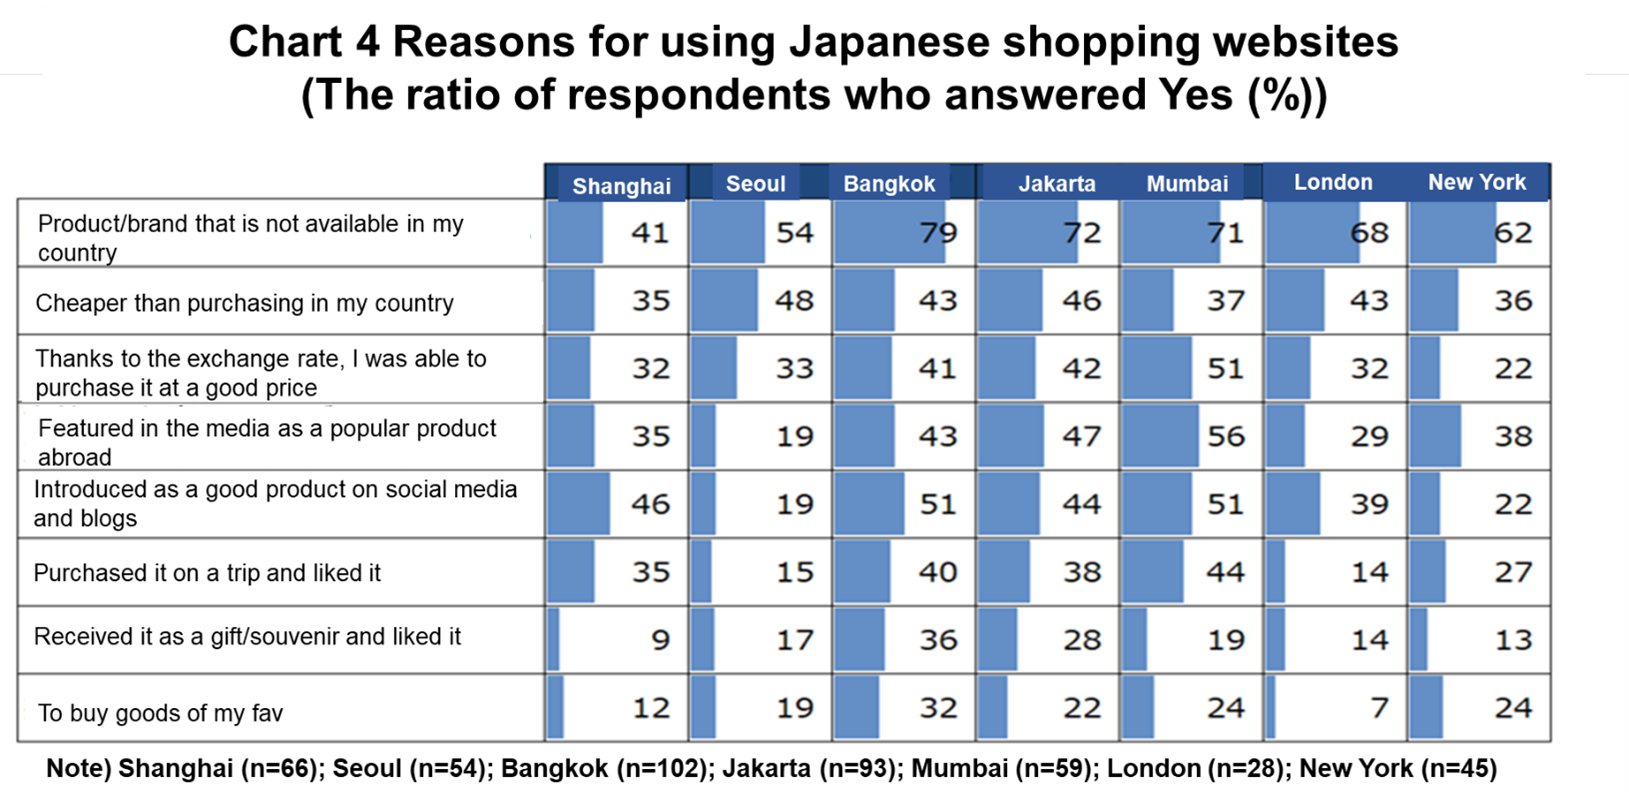 Chart 4 Reasons for using Japanese shopping websites (The ratio of respondents who answered Yes (%))